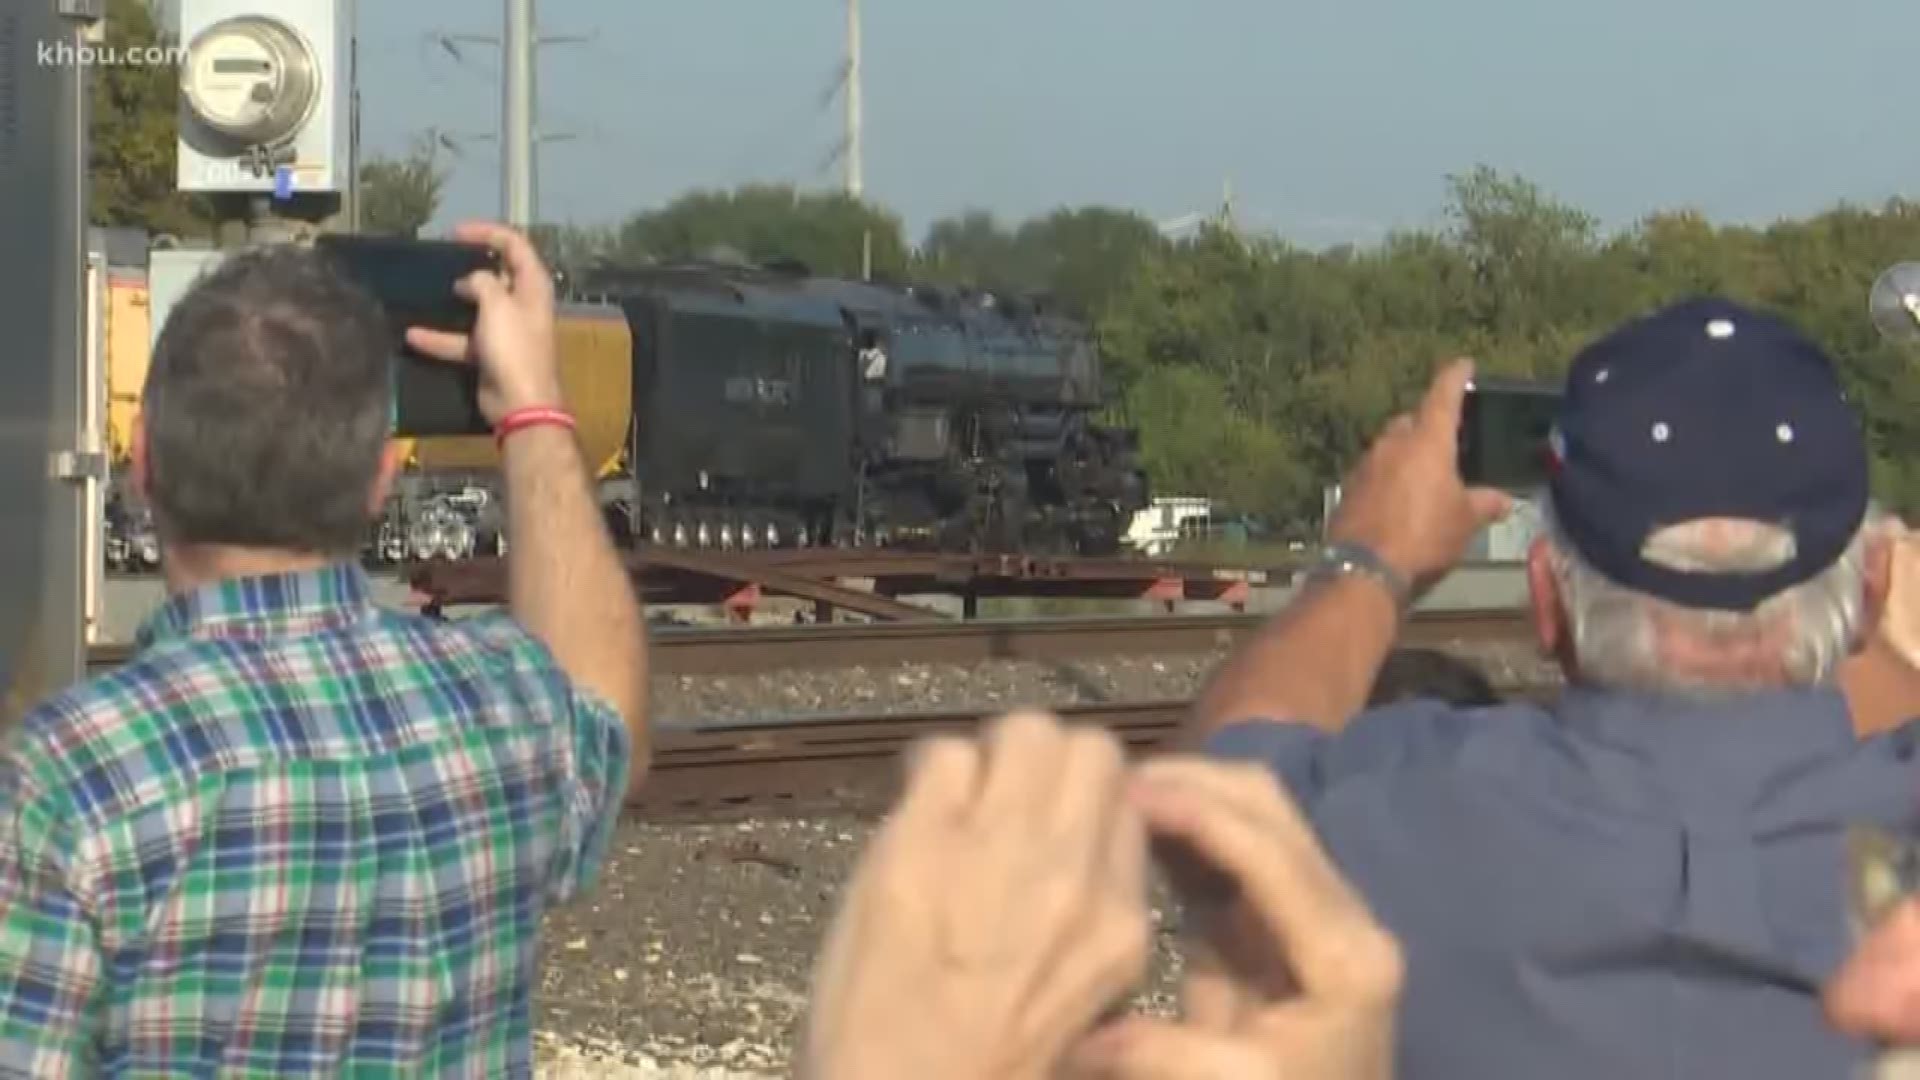 Union Pacific’s historic Big Boy No. 4014 steam locomotive is making its way through the Houston area as part of a tour throughout the United States.